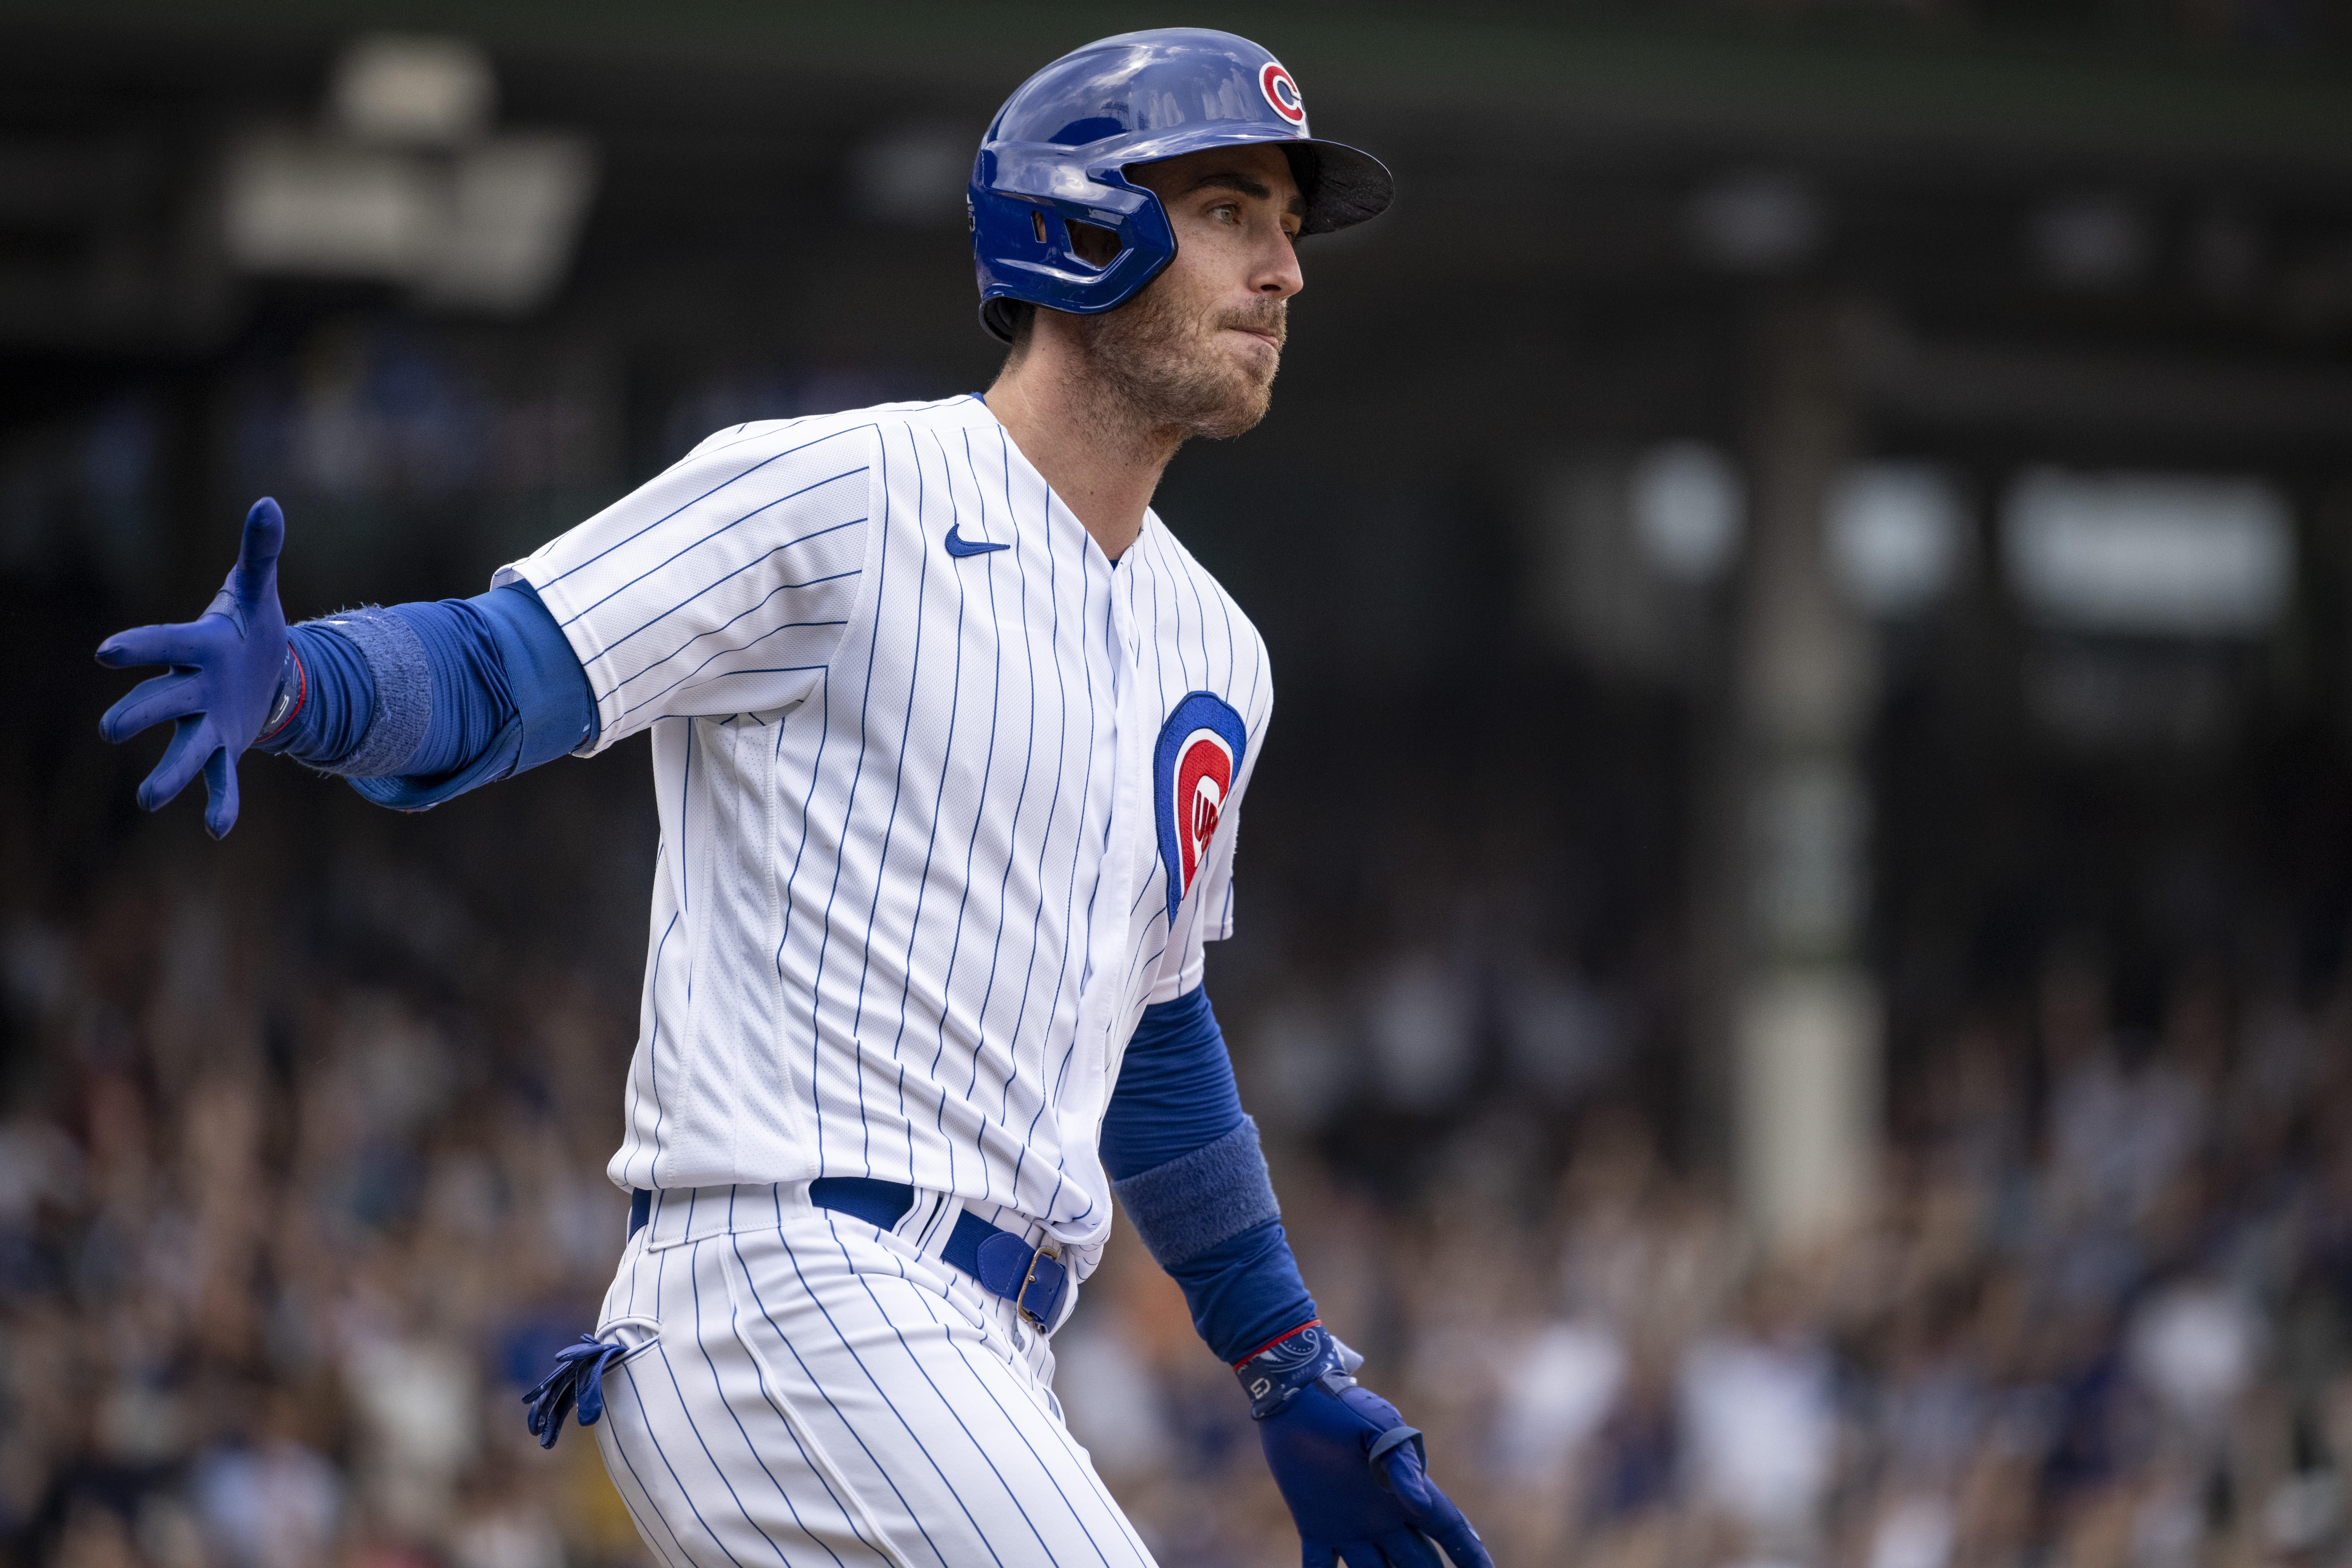 Cody Bellinger Profile: player info, stats, news, video 